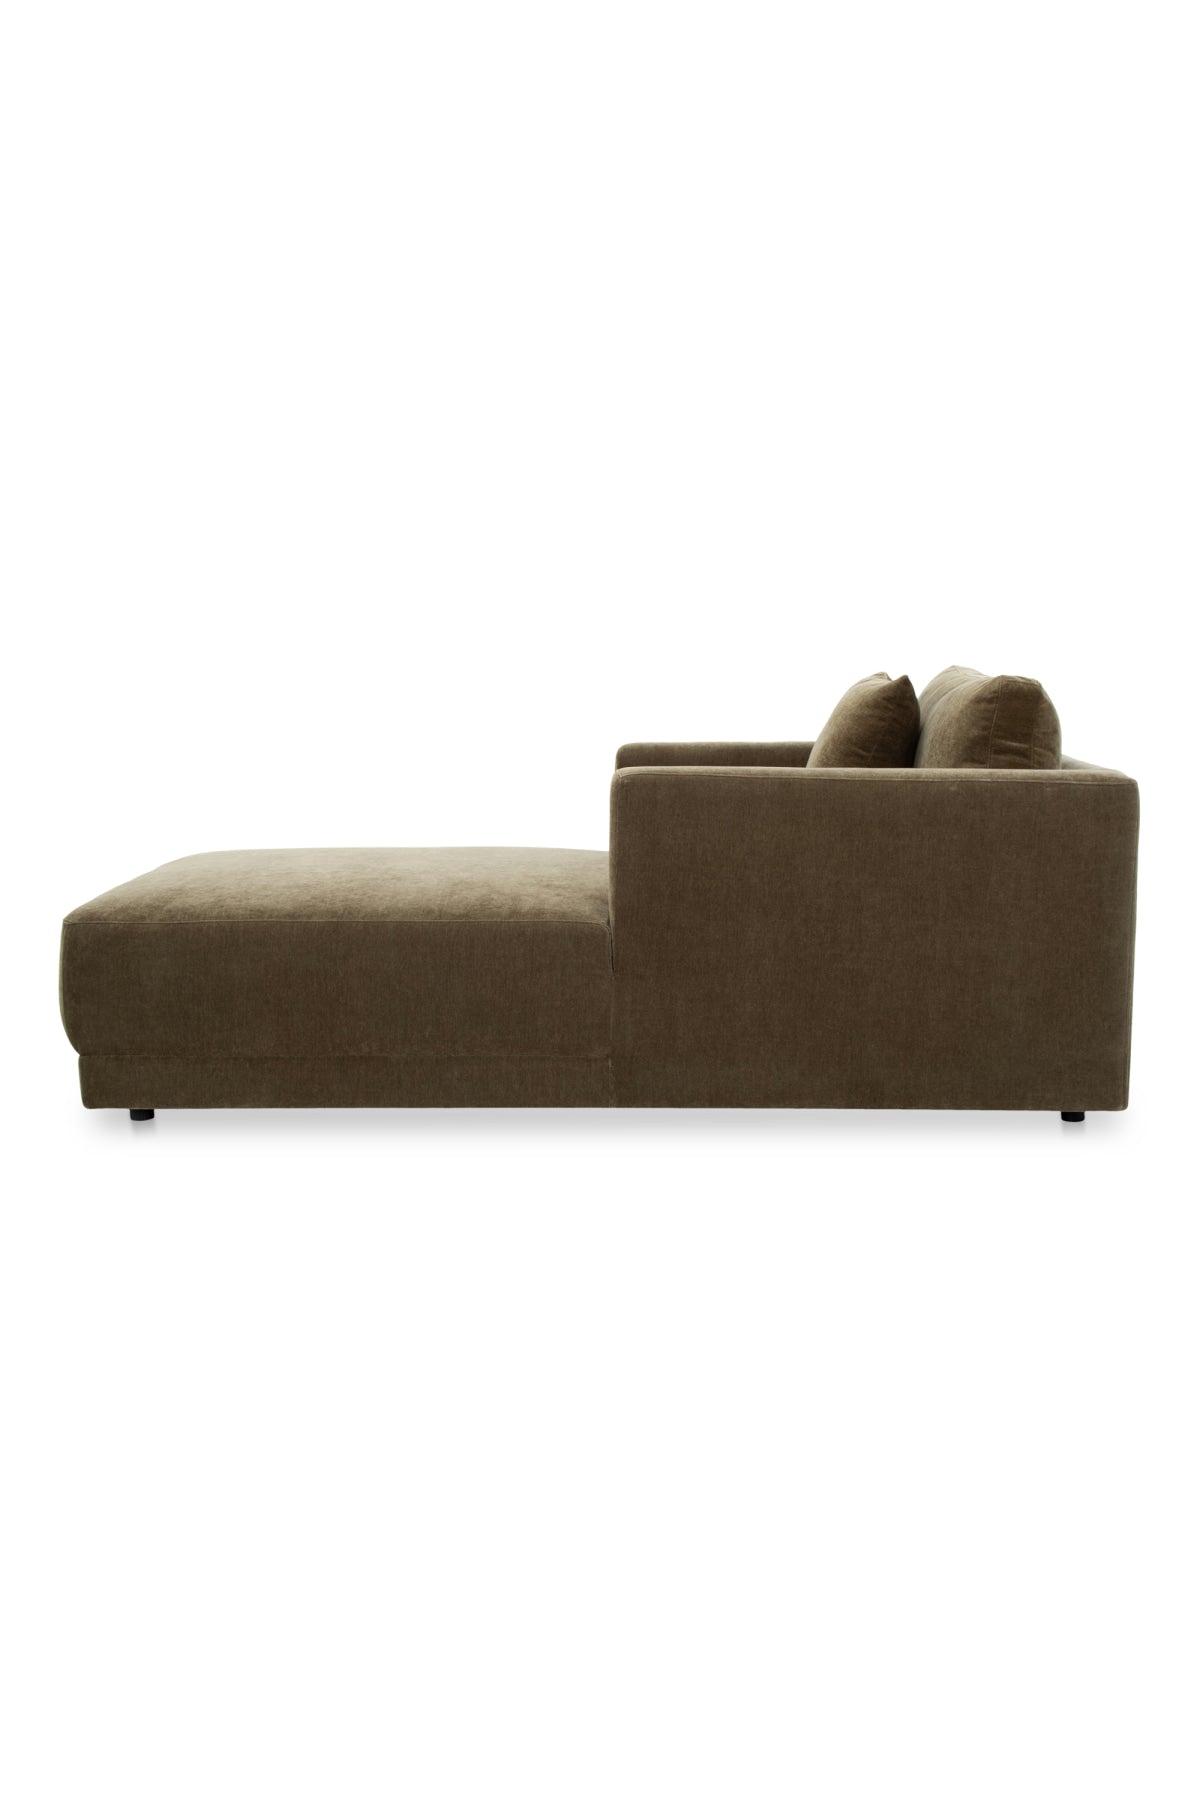 Stacatto Chaise - Heritage Green